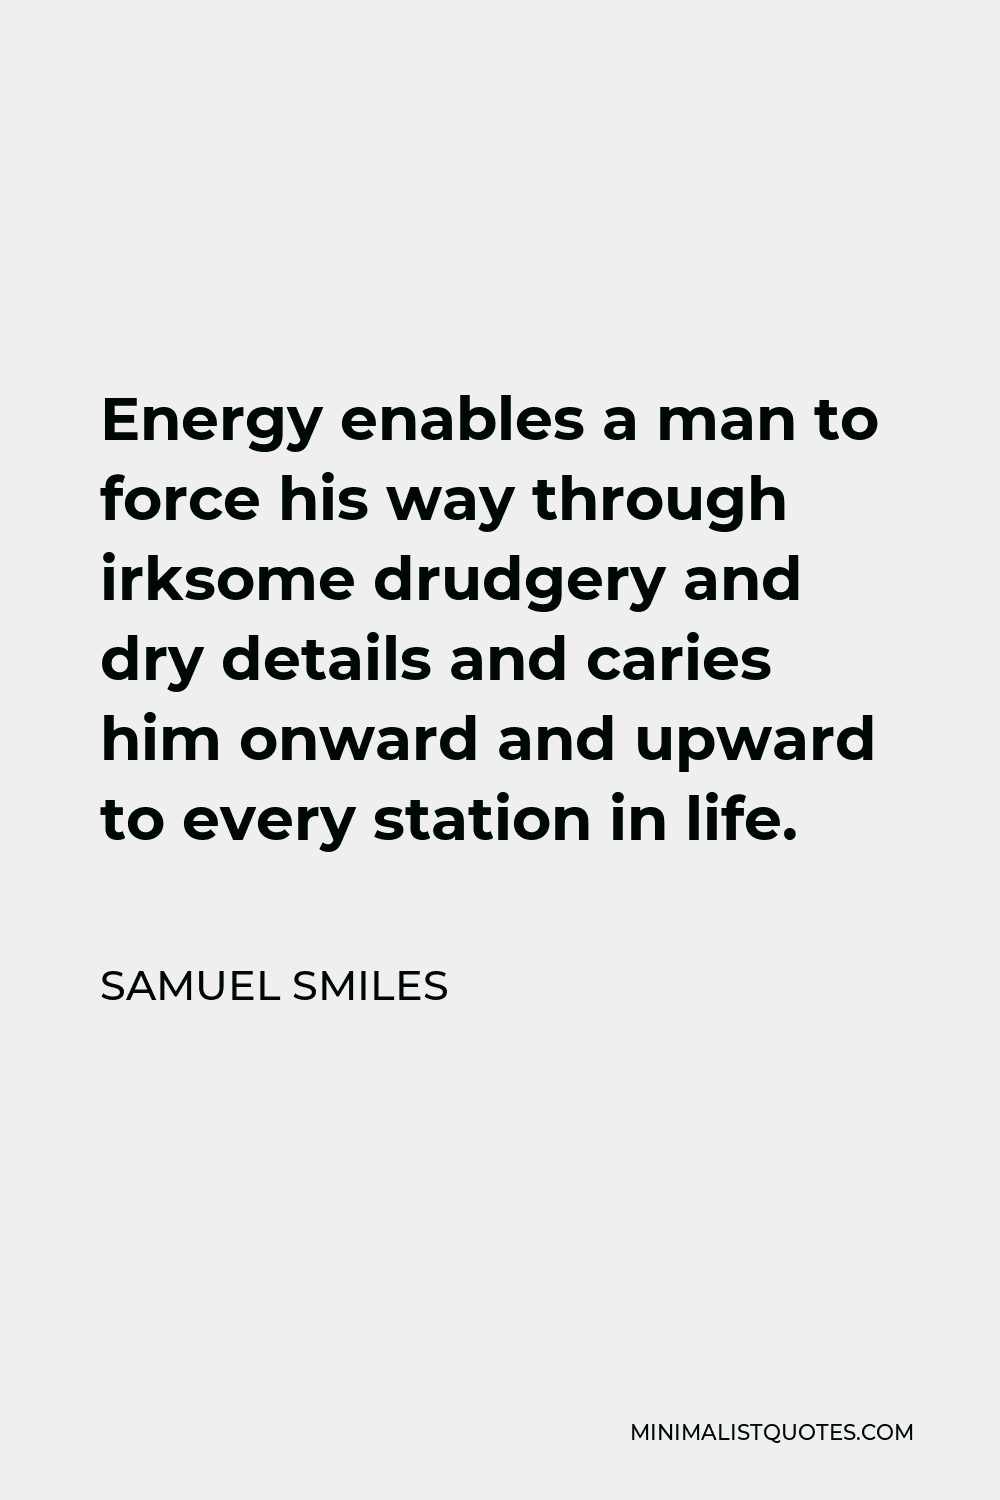 Samuel Smiles Quote - Energy enables a man to force his way through irksome drudgery and dry details and caries him onward and upward to every station in life.